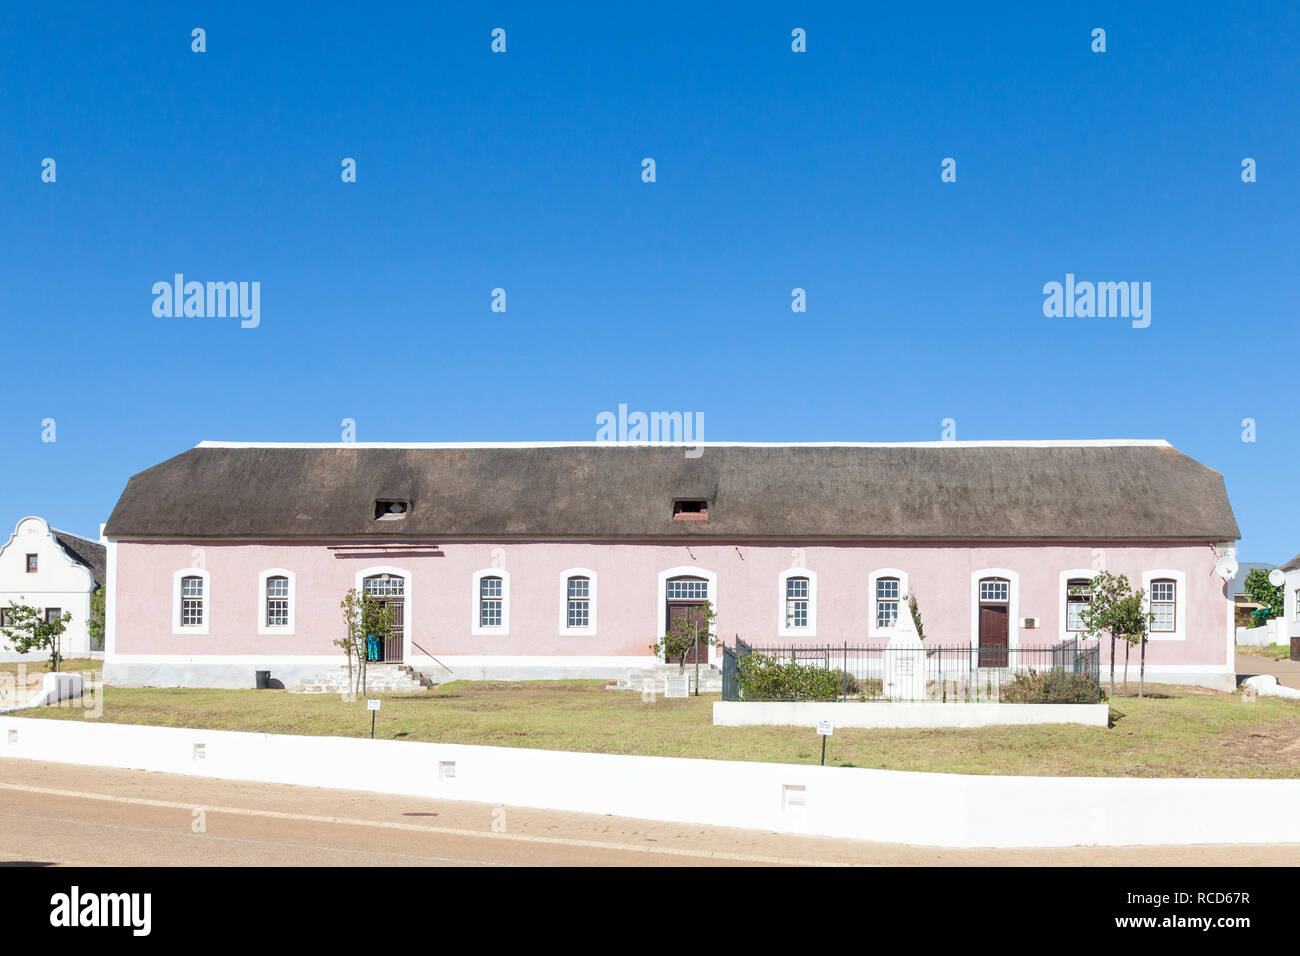 Elim Moravian Mission Station, Overberg, Western Cape, South Africa established in 1838 to house  freed slaves. The memorial to the Freed Slaves estab Stock Photo